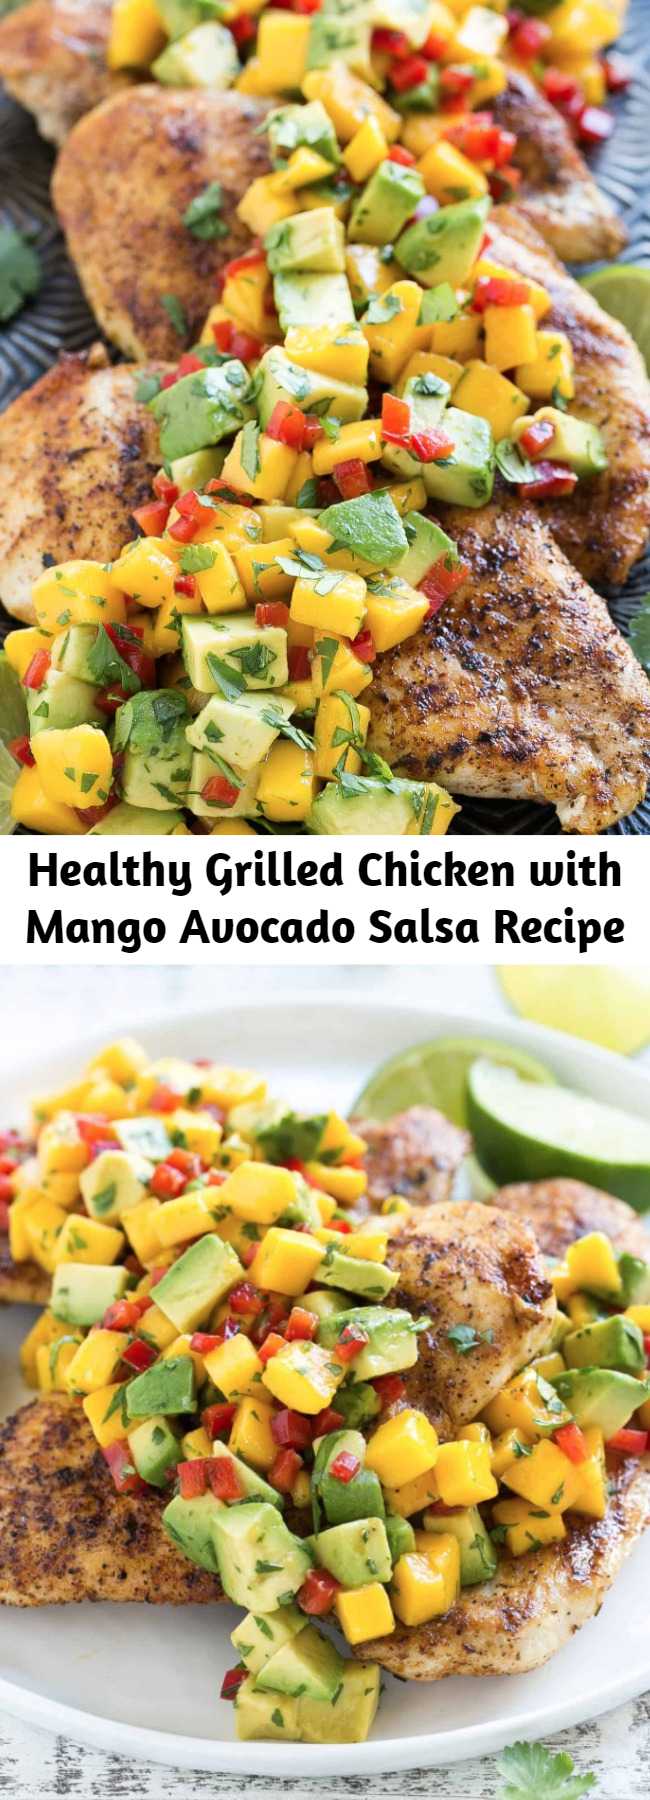 Healthy Grilled Chicken with Mango Avocado Salsa Recipe - Healthy and simple Grilled Chicken made with a super delicious Mango Salsa recipe. It’s important to dress things up around the dinner table and this recipe is a good place to start. Adds some twist and flavor to your chicken recipe.